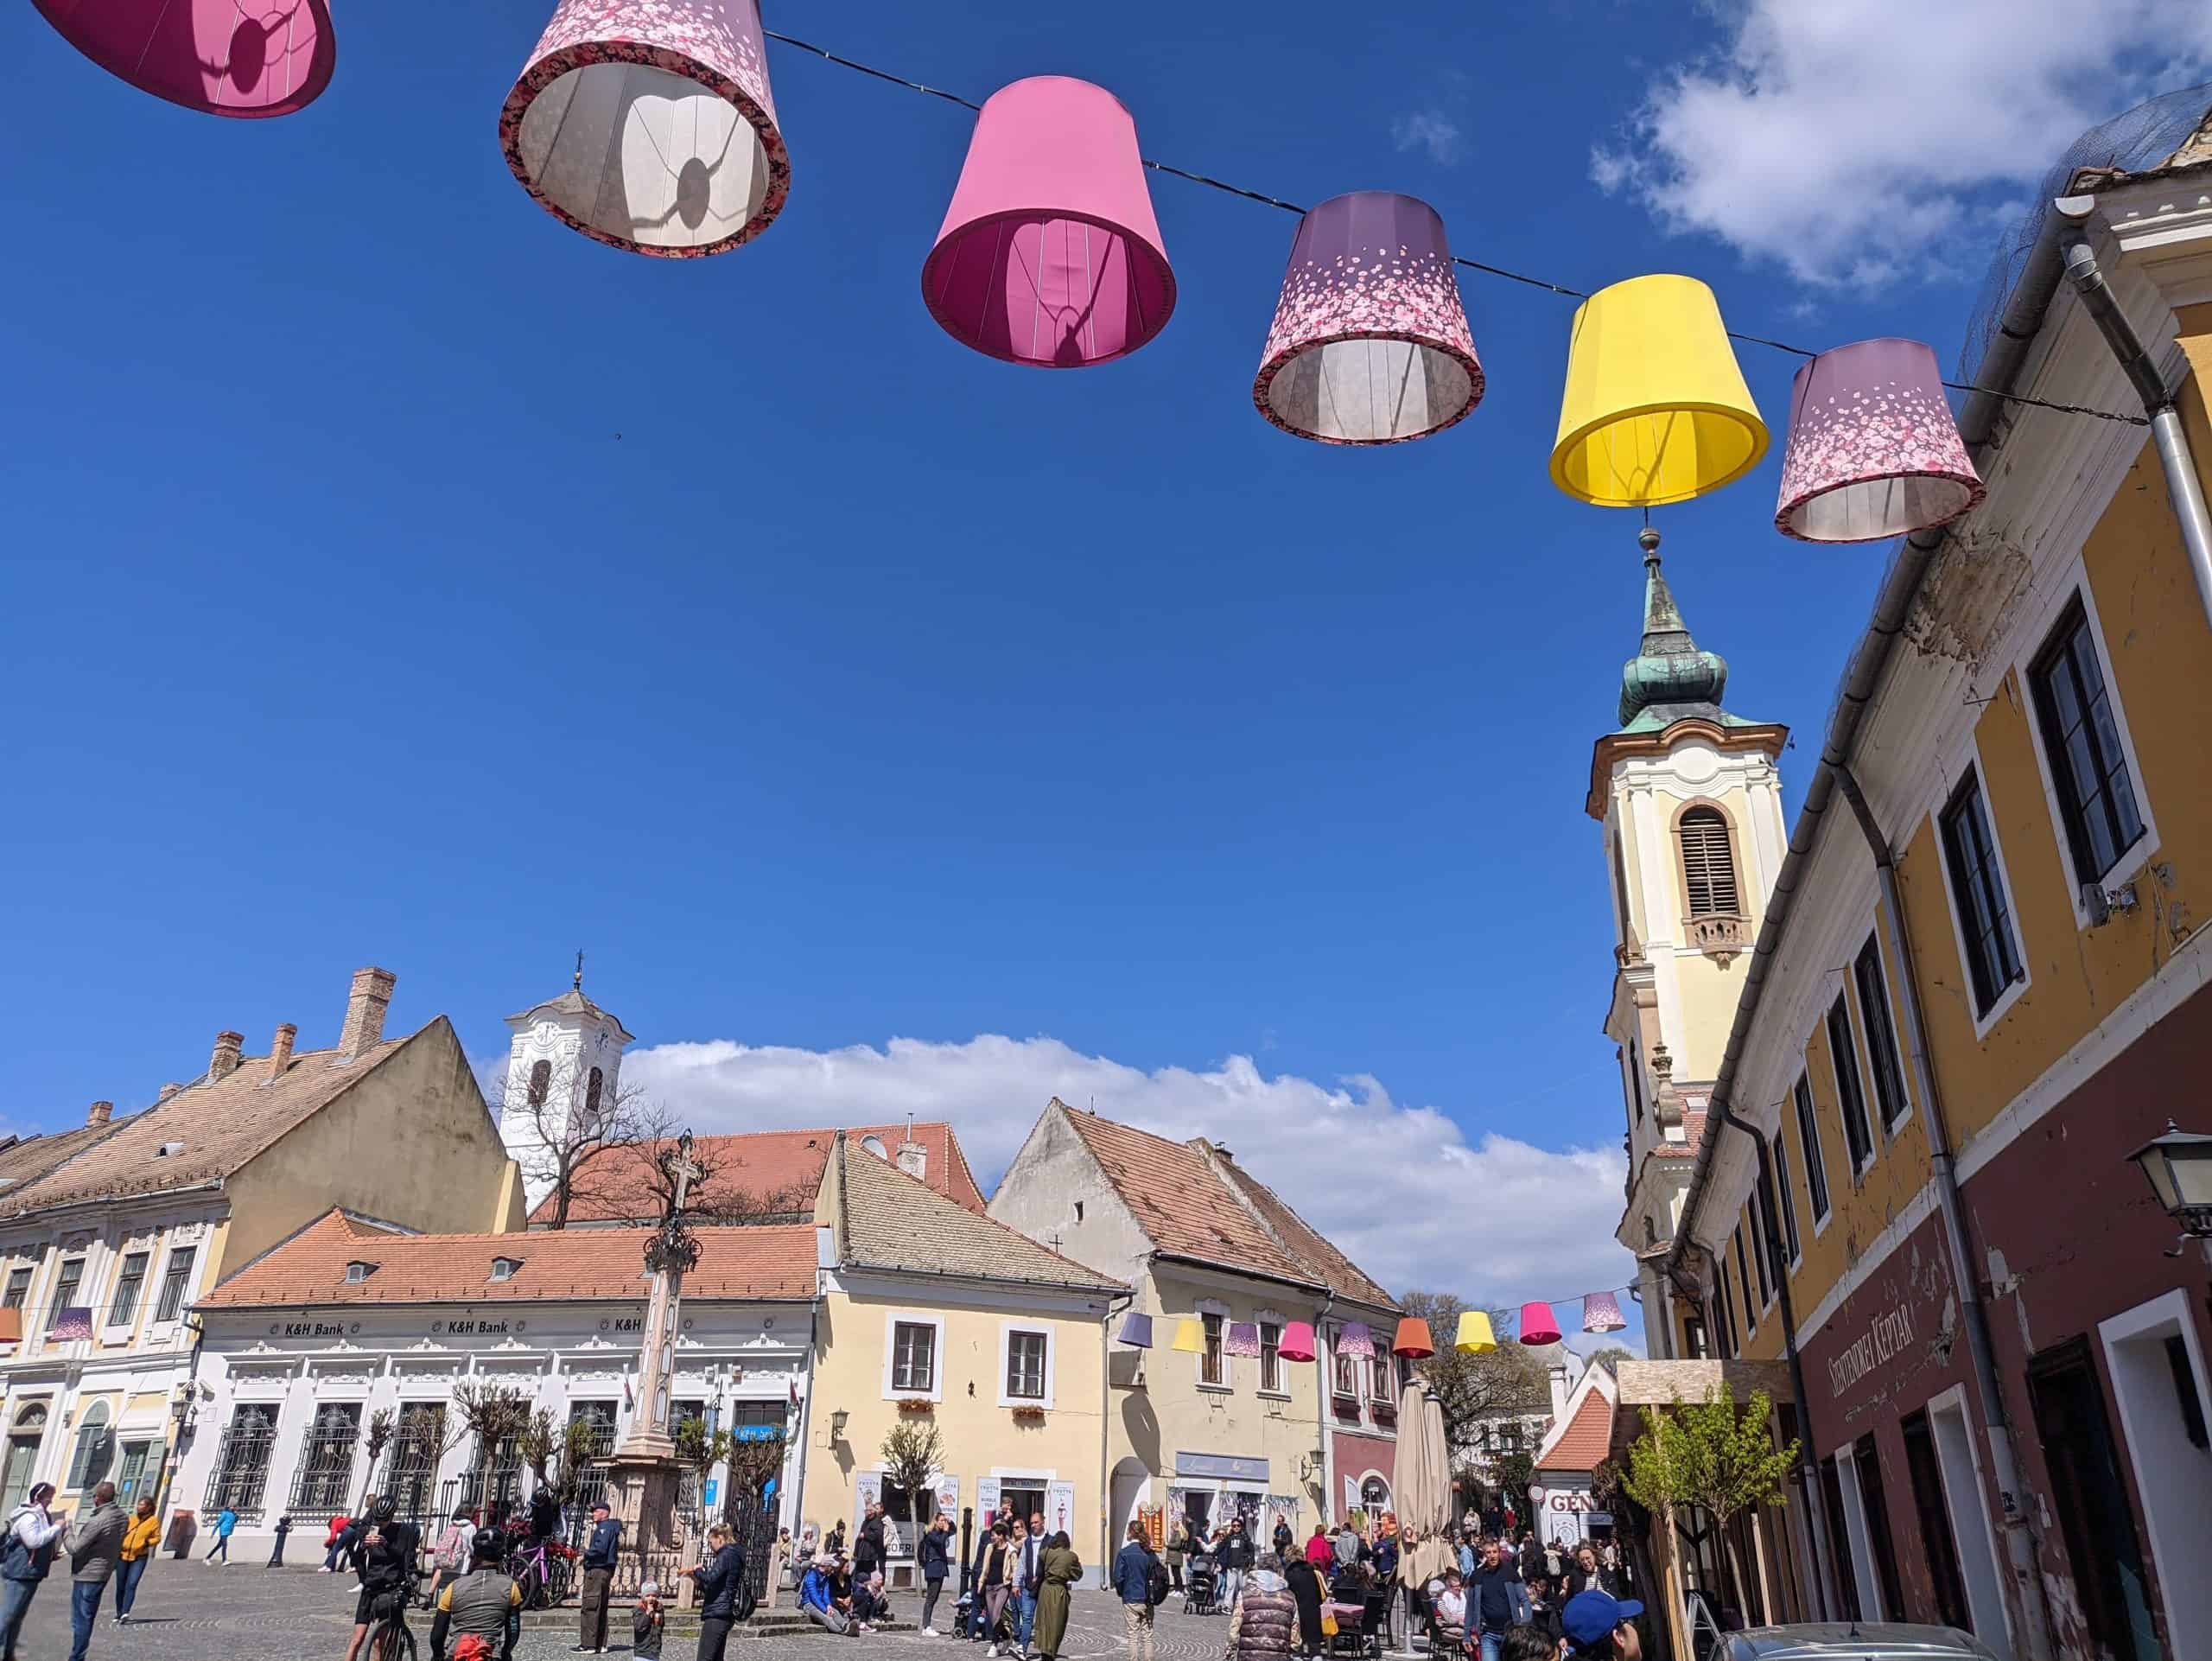 The old town of Szentendre, abuzz with activity